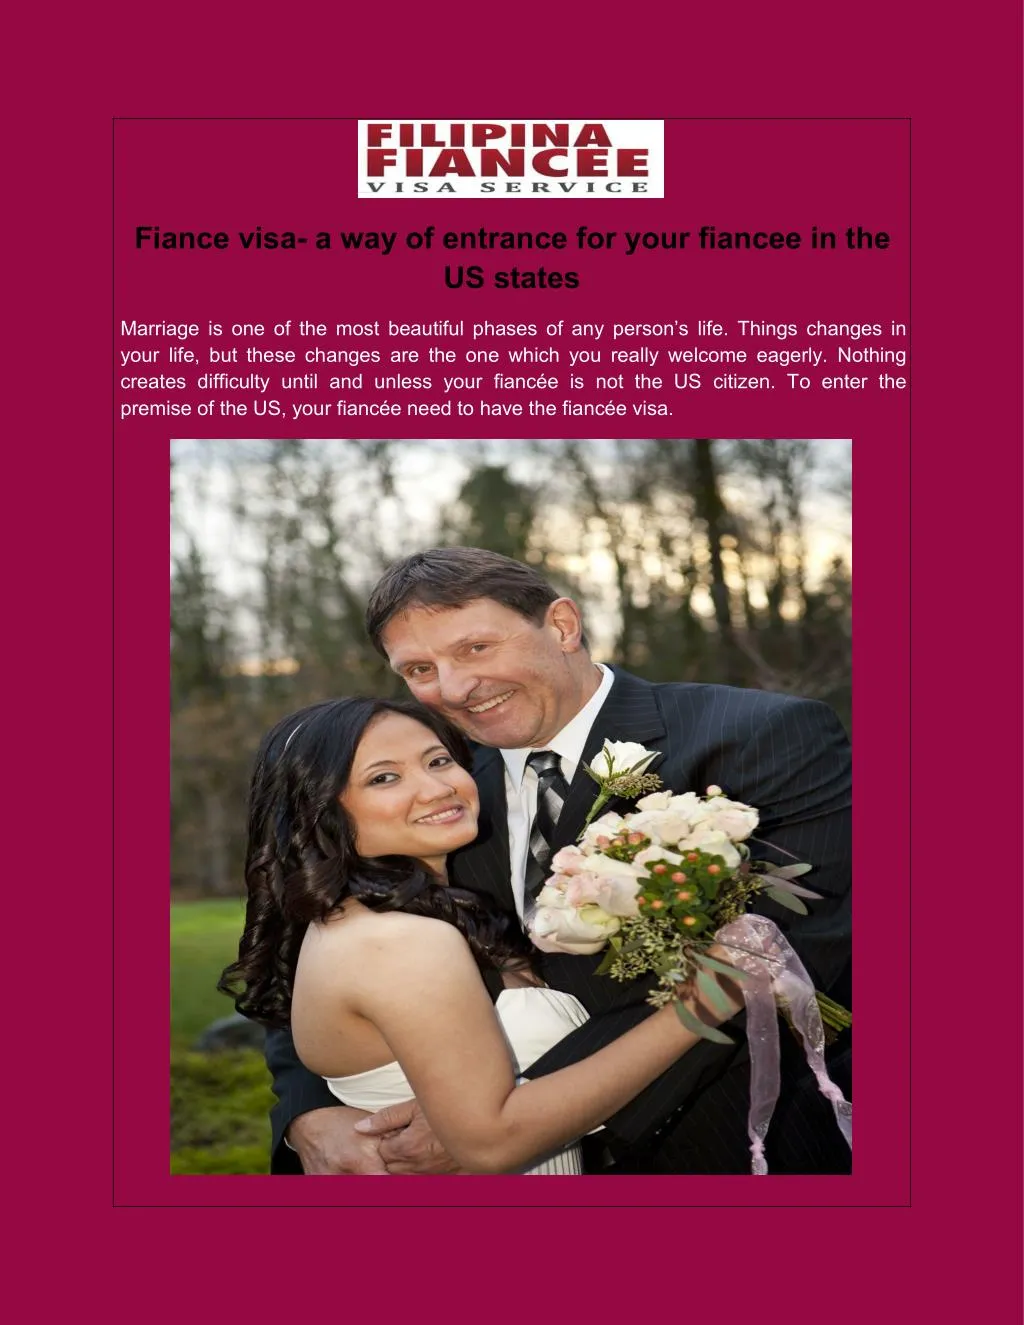 fiance visa a way of entrance for your fiancee